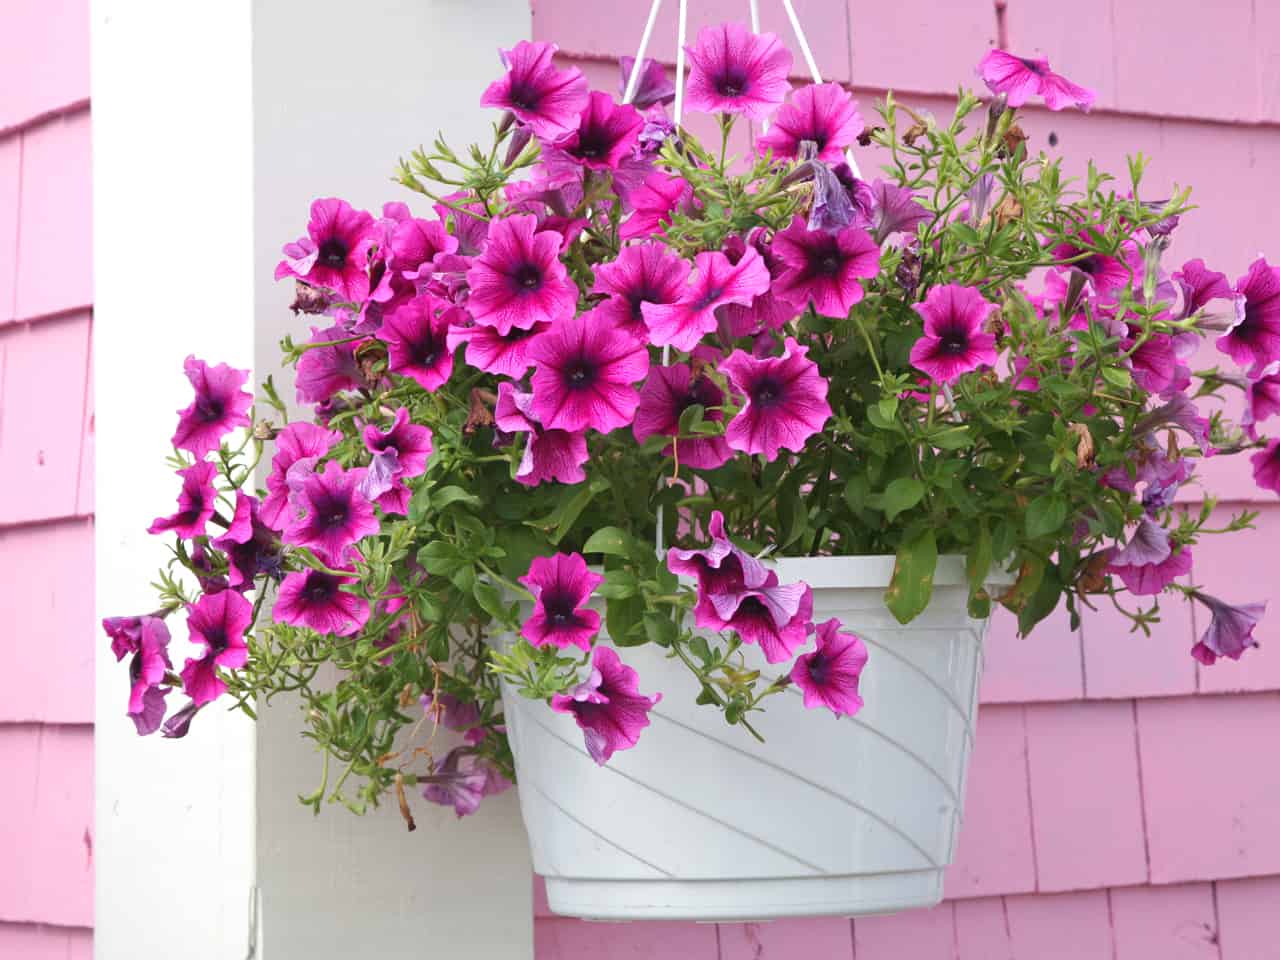 Bright pink plant in a hanging basket